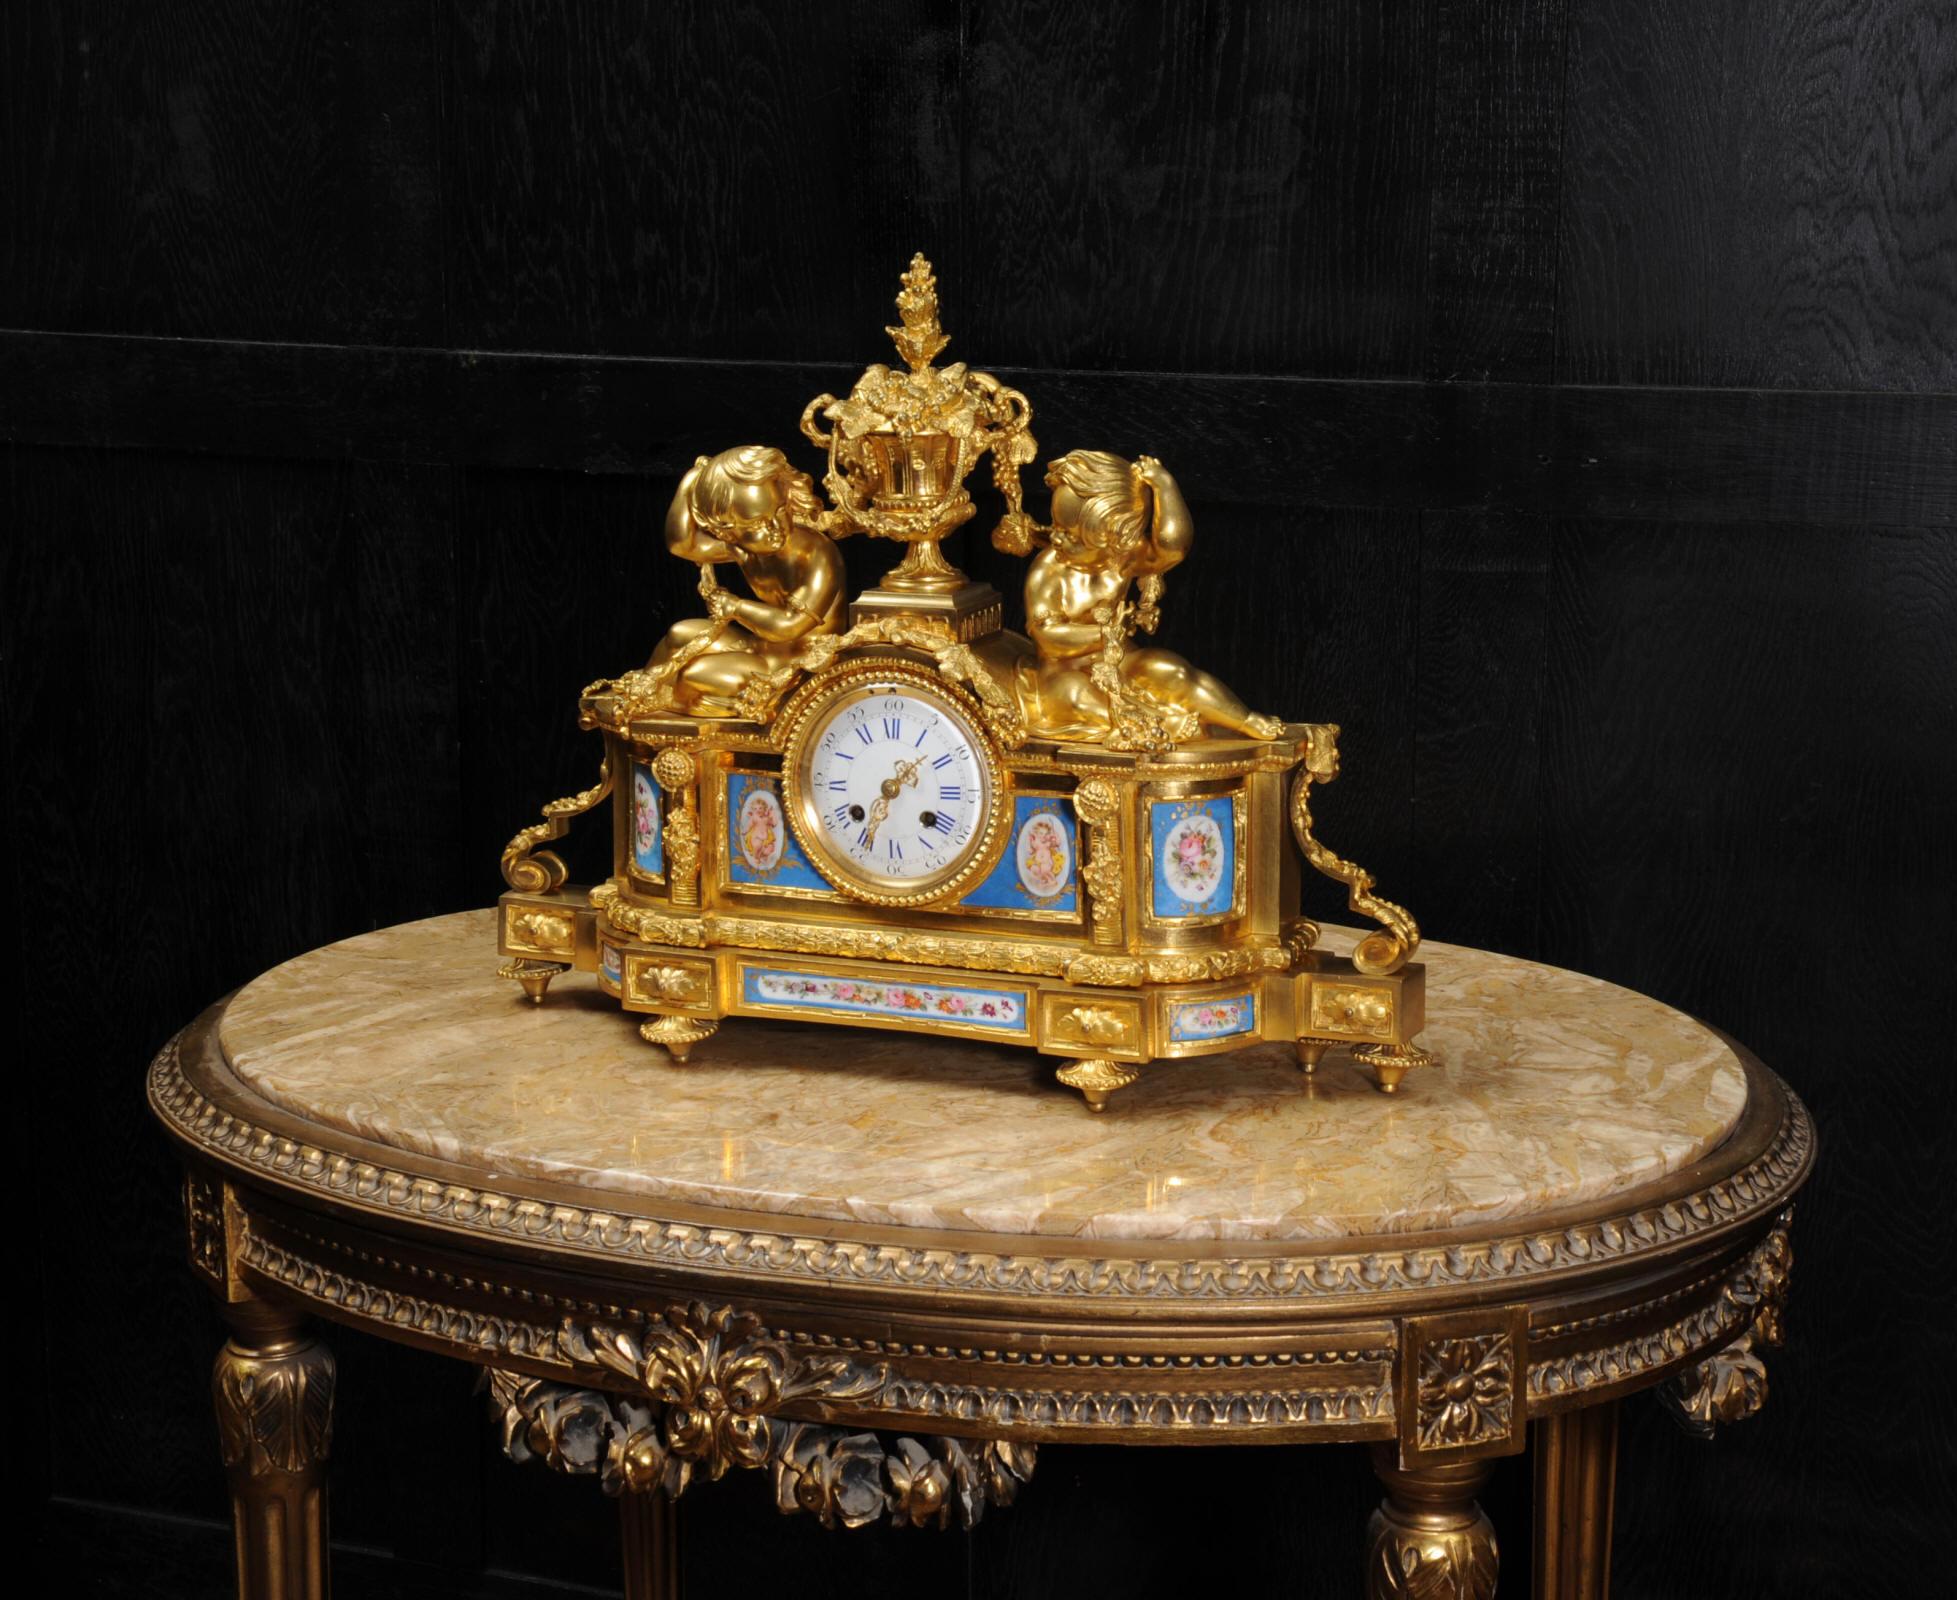 A very fine and early ormolu (finely gilded bronze) clock mounted with exquisite Sèvres style porcelain panels. Two seated cherubs sit each side of an urn, draped with vines, celebrating the grape harvest in a tribute to Bacchus, the Roman god of